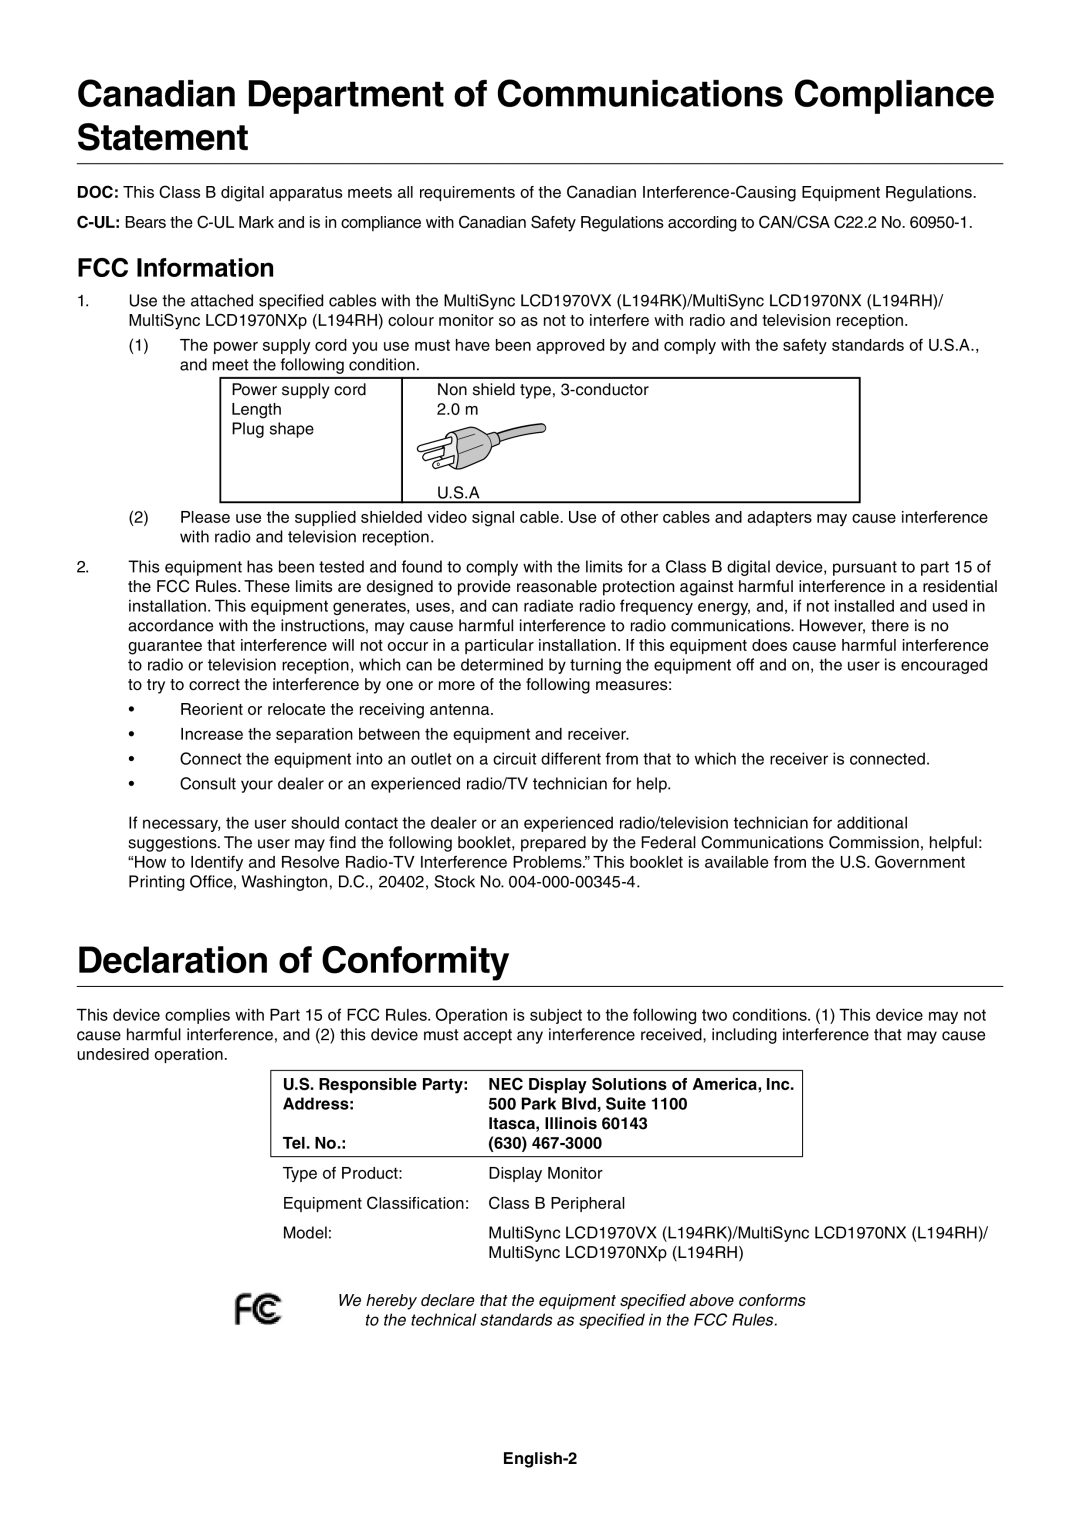 NEC LCD1970VX Canadian Department of Communications Compliance Statement, Declaration of Conformity, FCC Information 